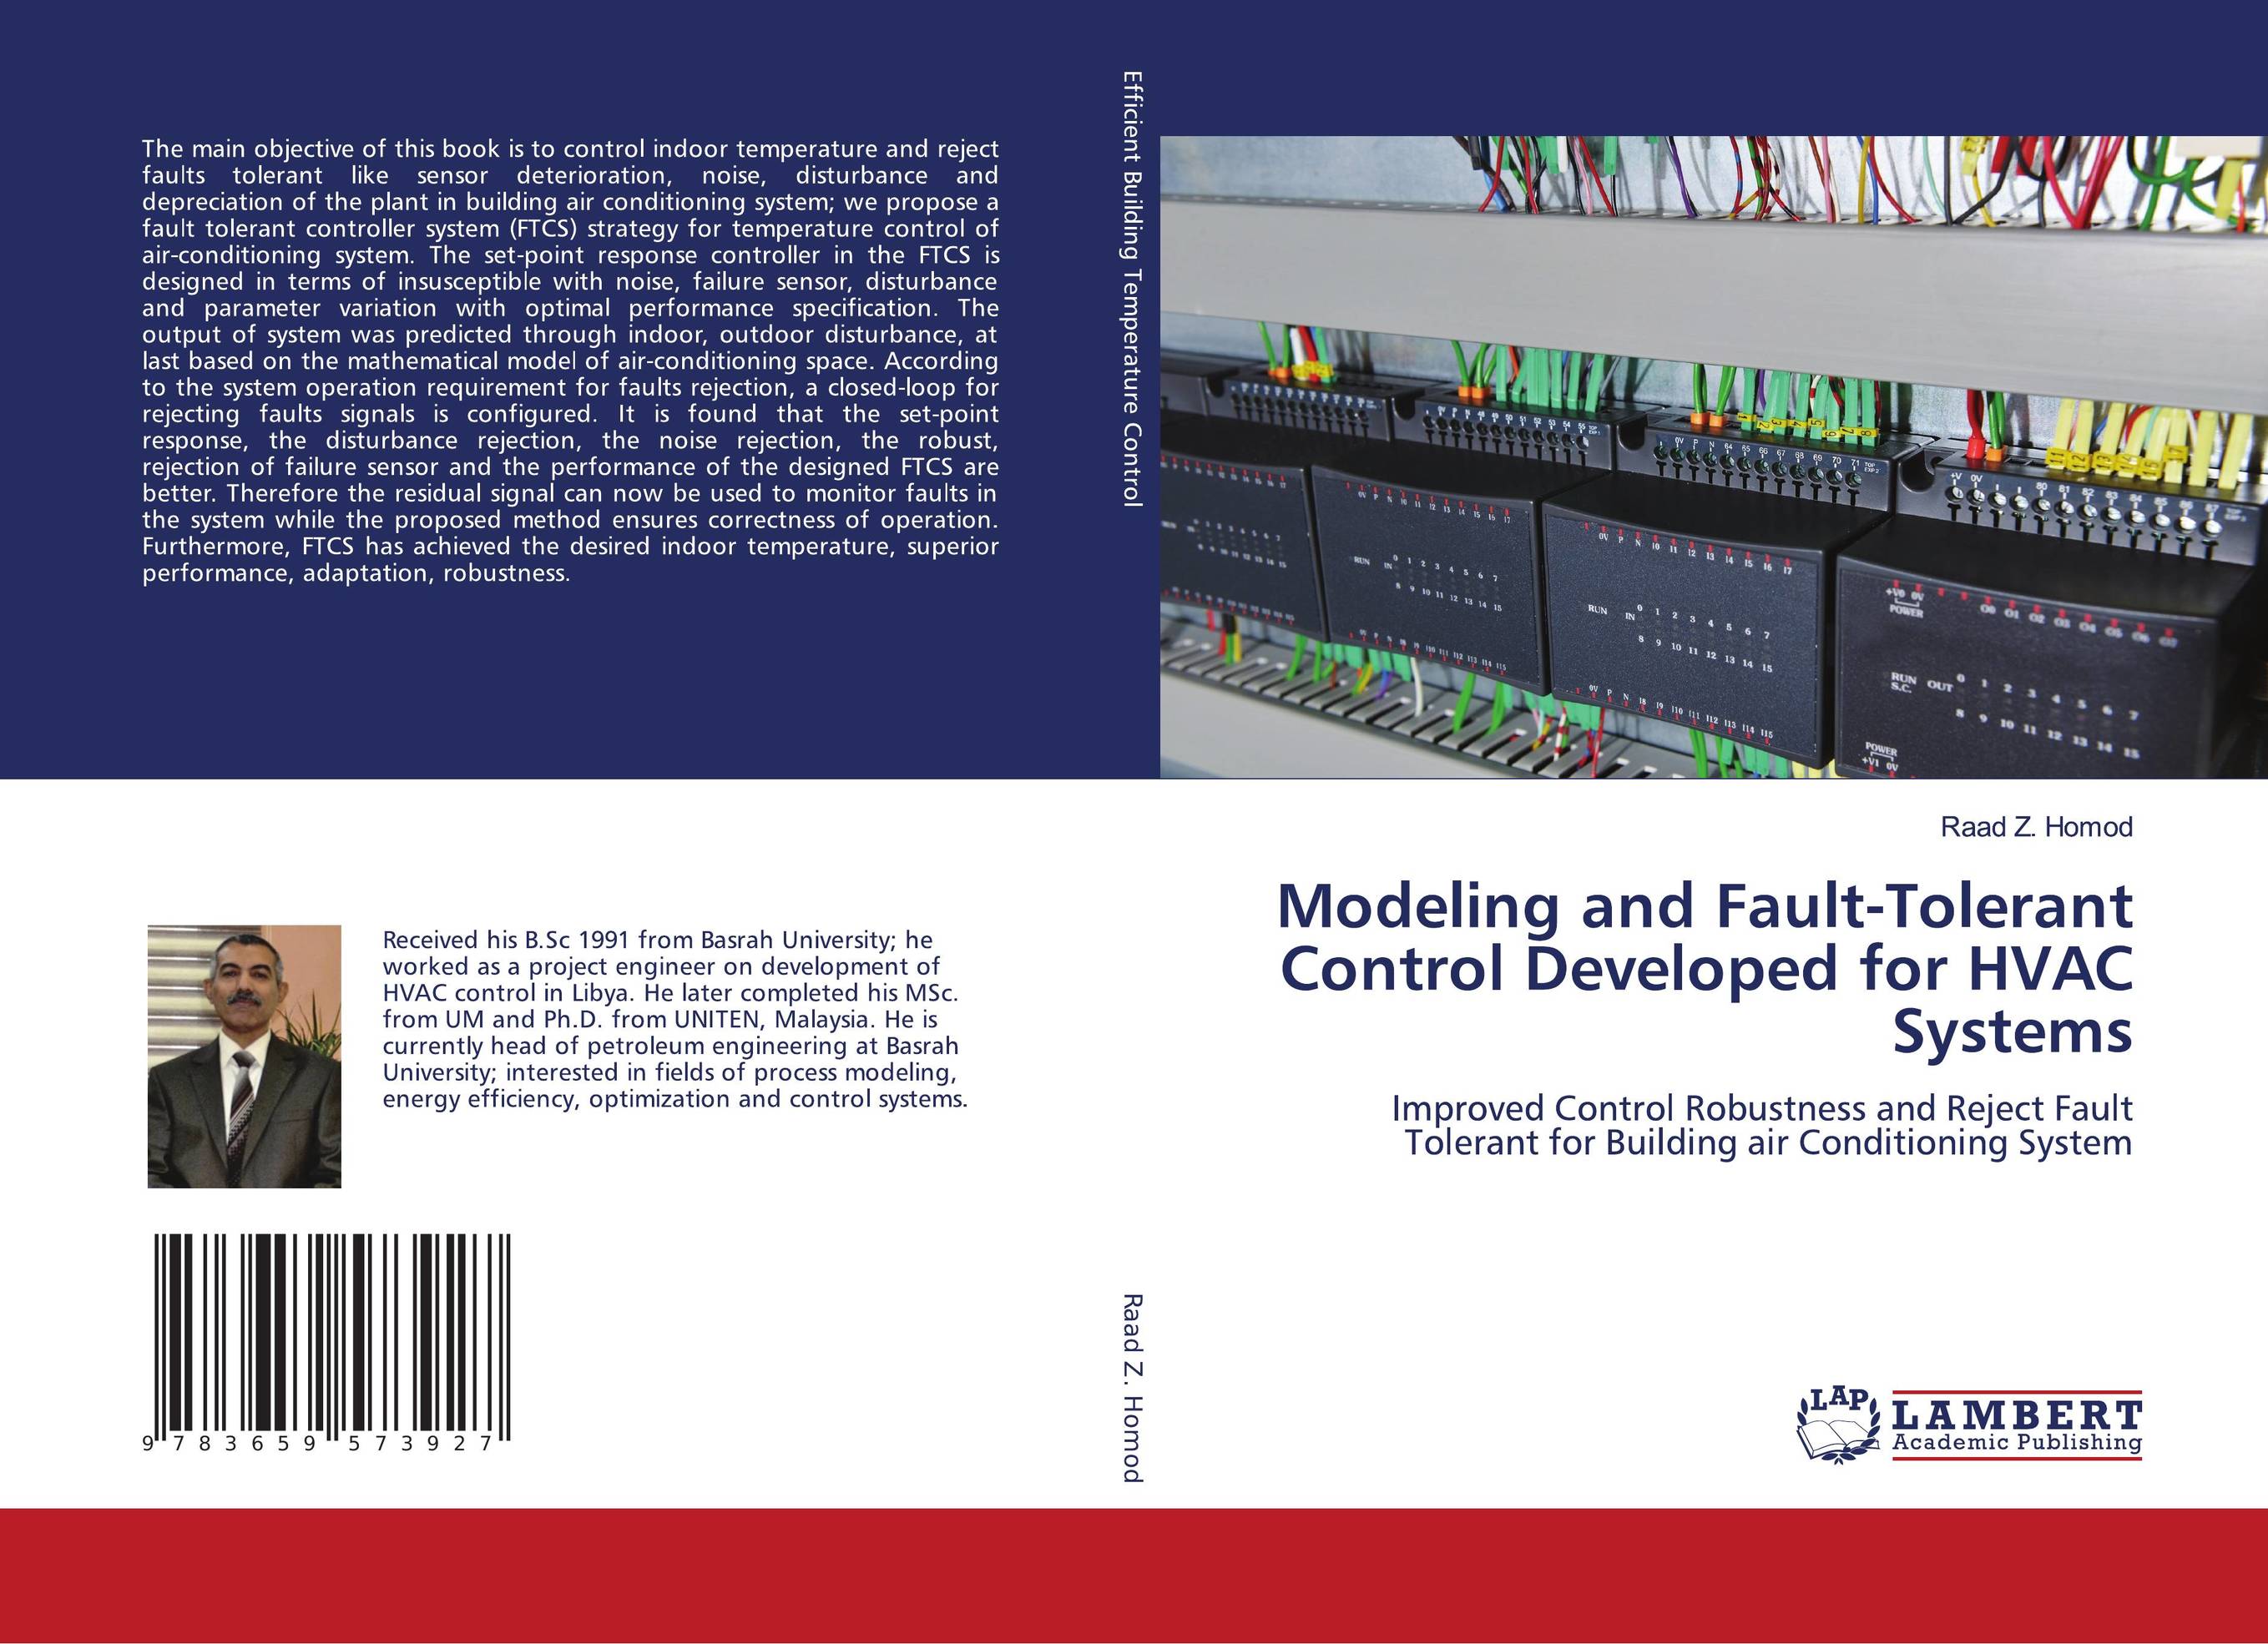 Engineers, of, efficient, have, methods, Control, developed.. Improved control